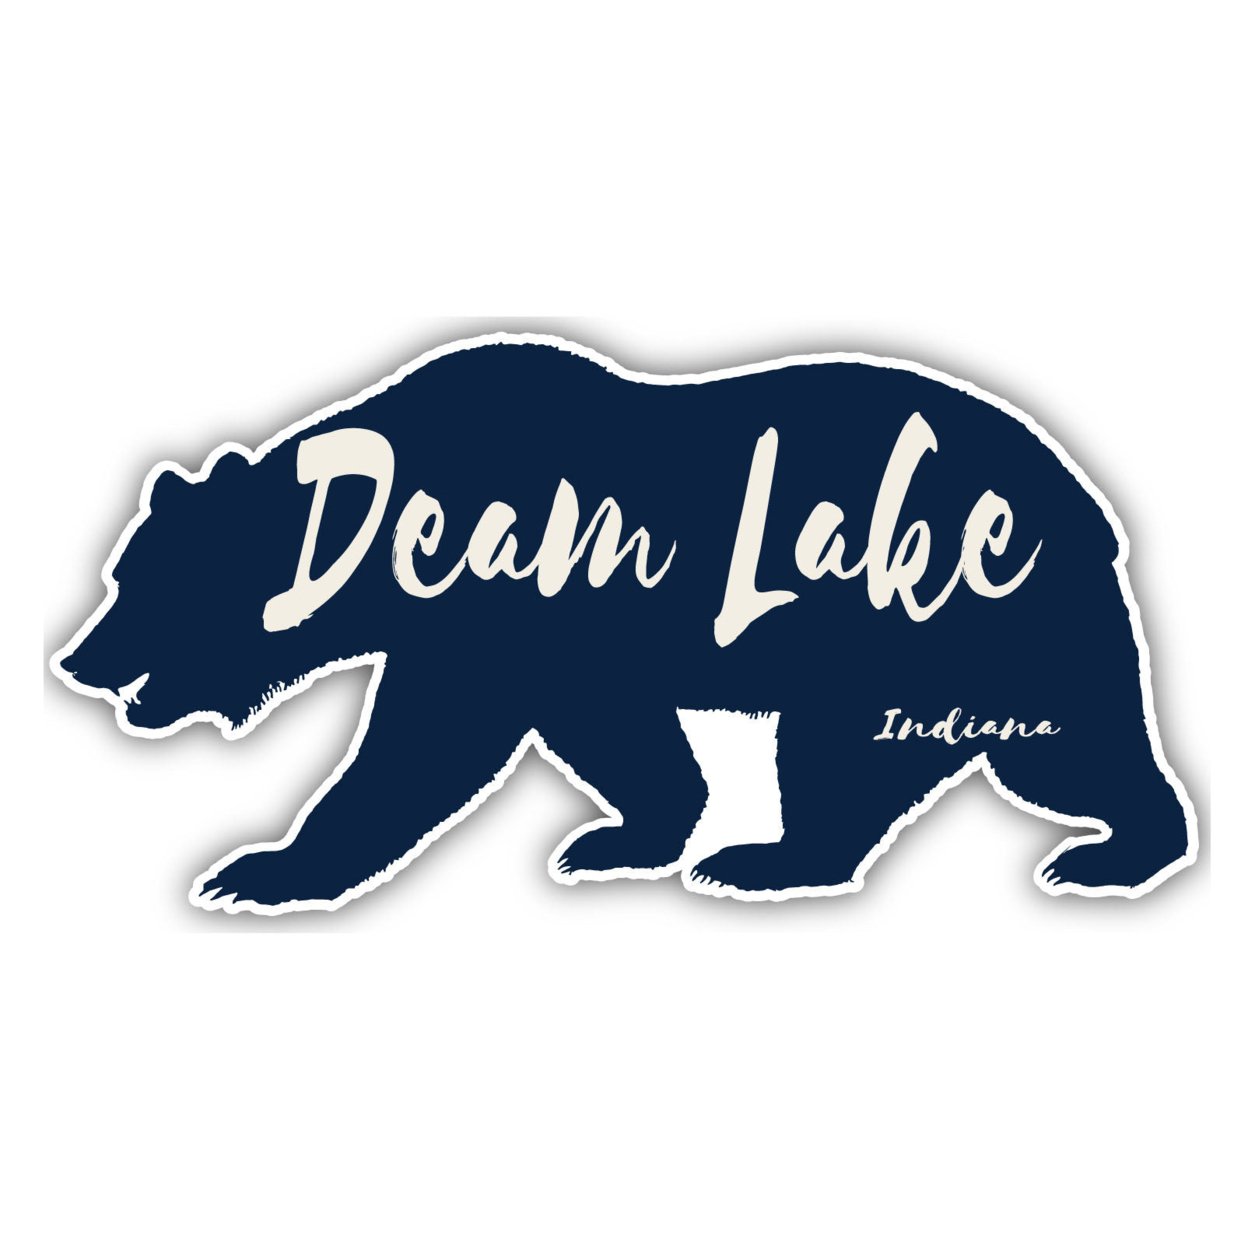 Deam Lake Indiana Souvenir Decorative Stickers (Choose Theme And Size) - 4-Pack, 6-Inch, Great Outdoors